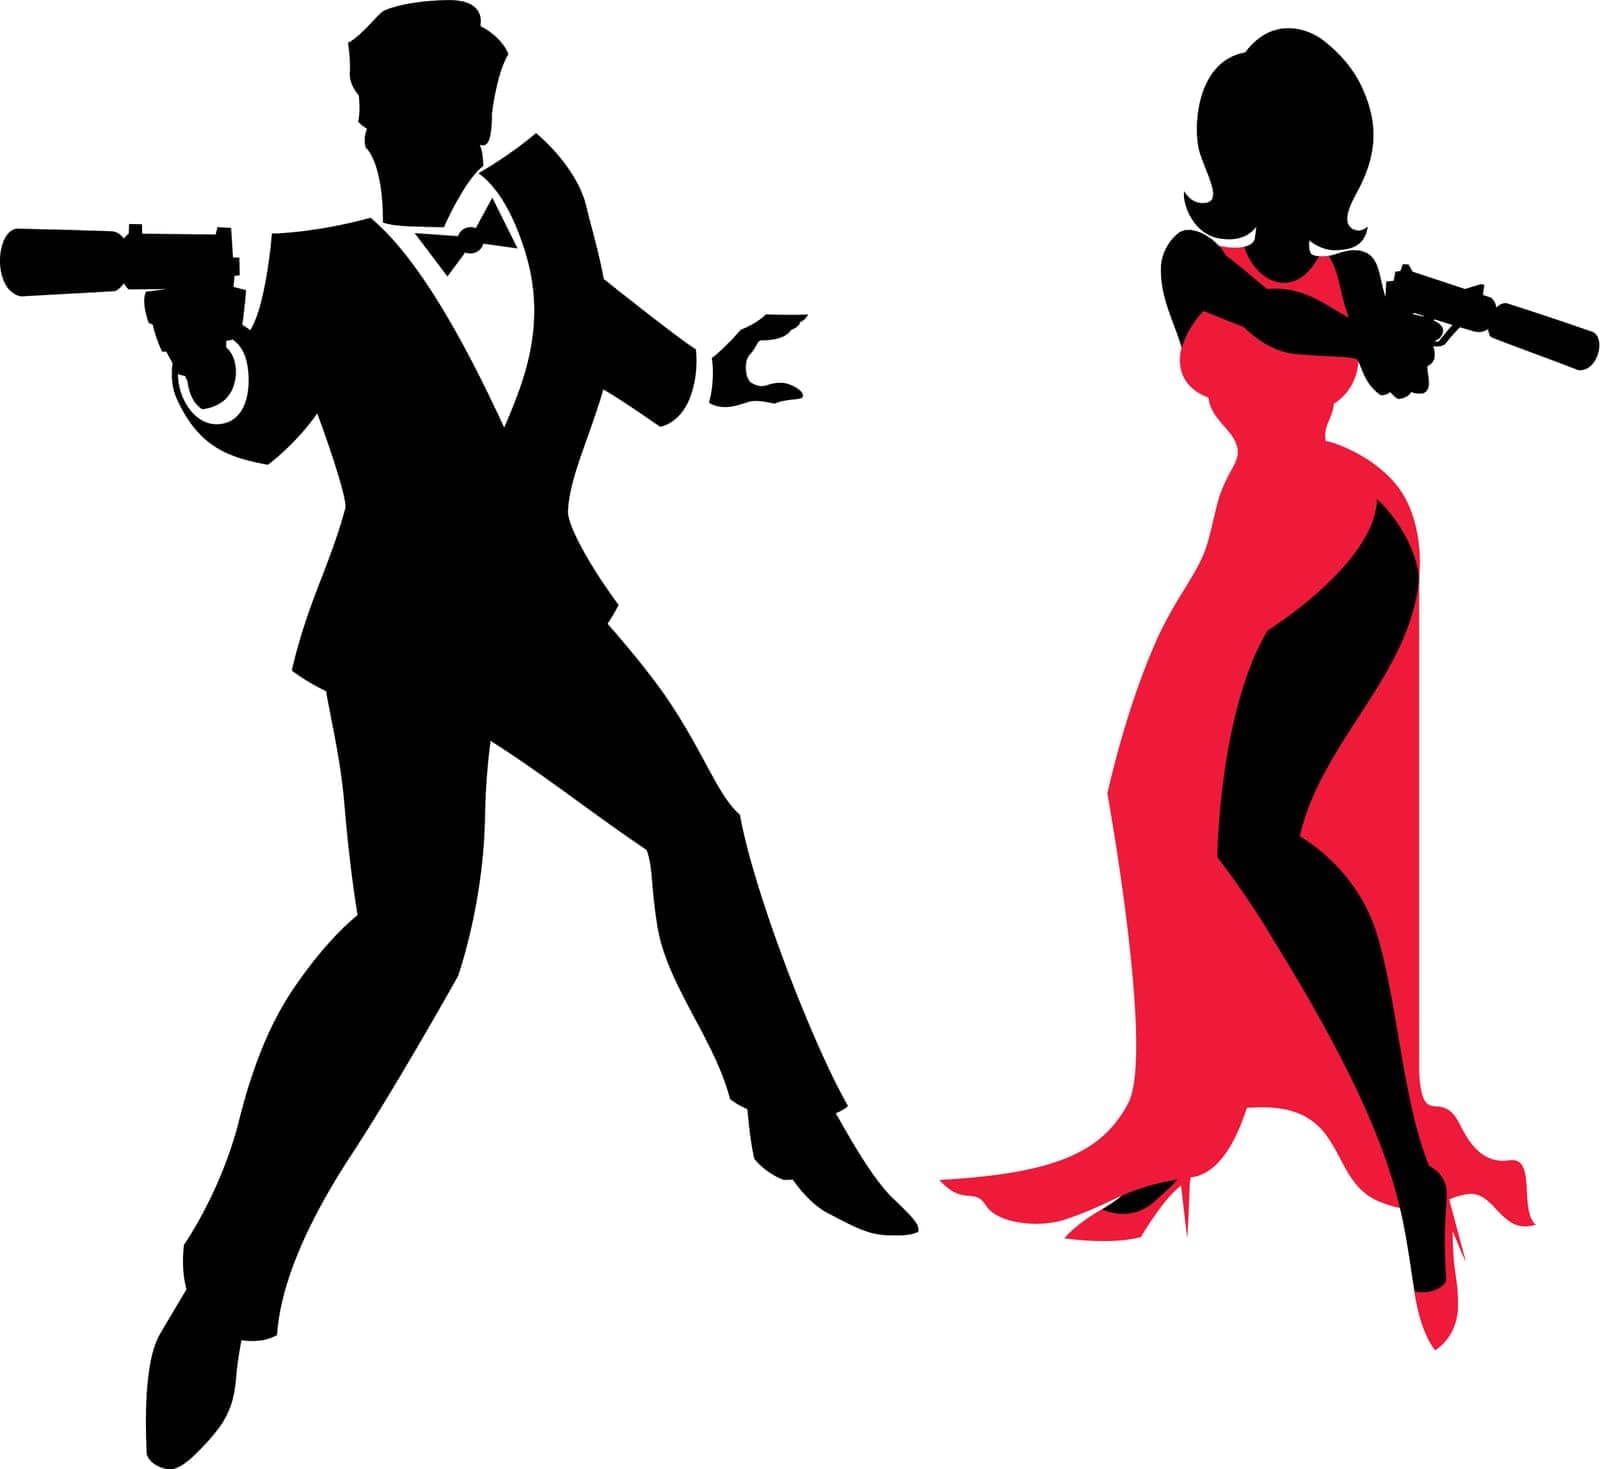 Silhouettes of spy couple over white background. No transparency and gradients used.